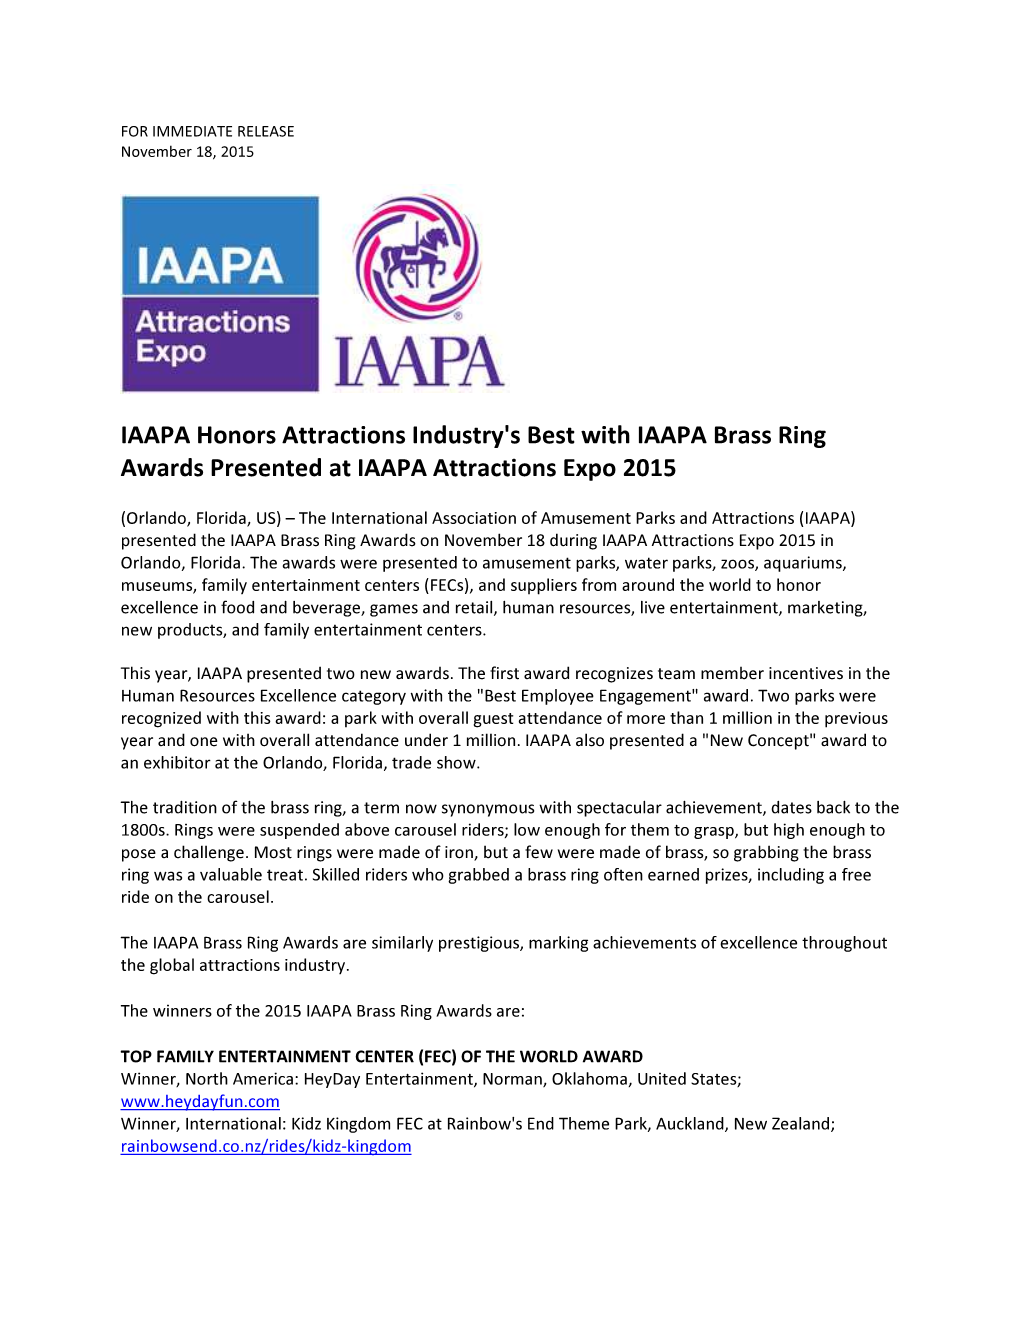 IAAPA Honors Attractions Industry's Best with IAAPA Brass Ring Awards Presented at IAAPA Attractions Expo 2015